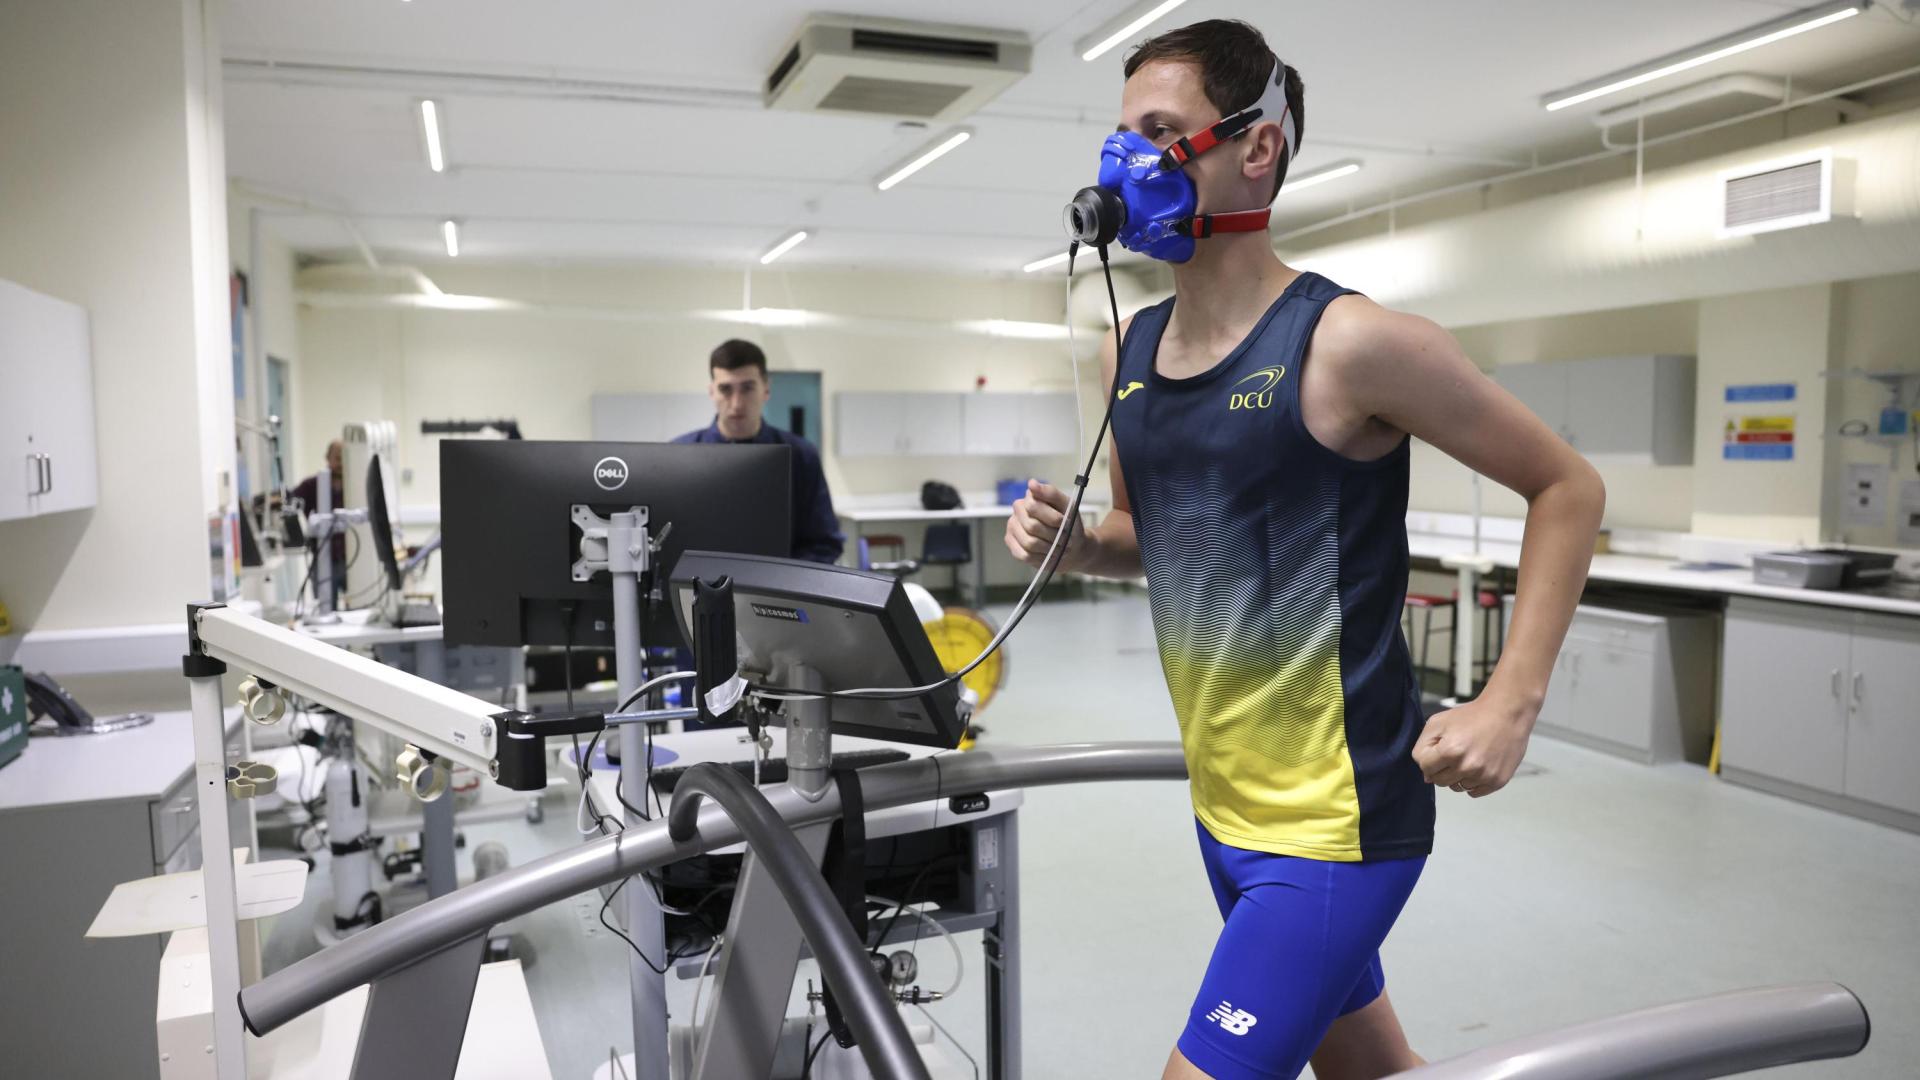 Shows athlete running on treadmill as part of research study